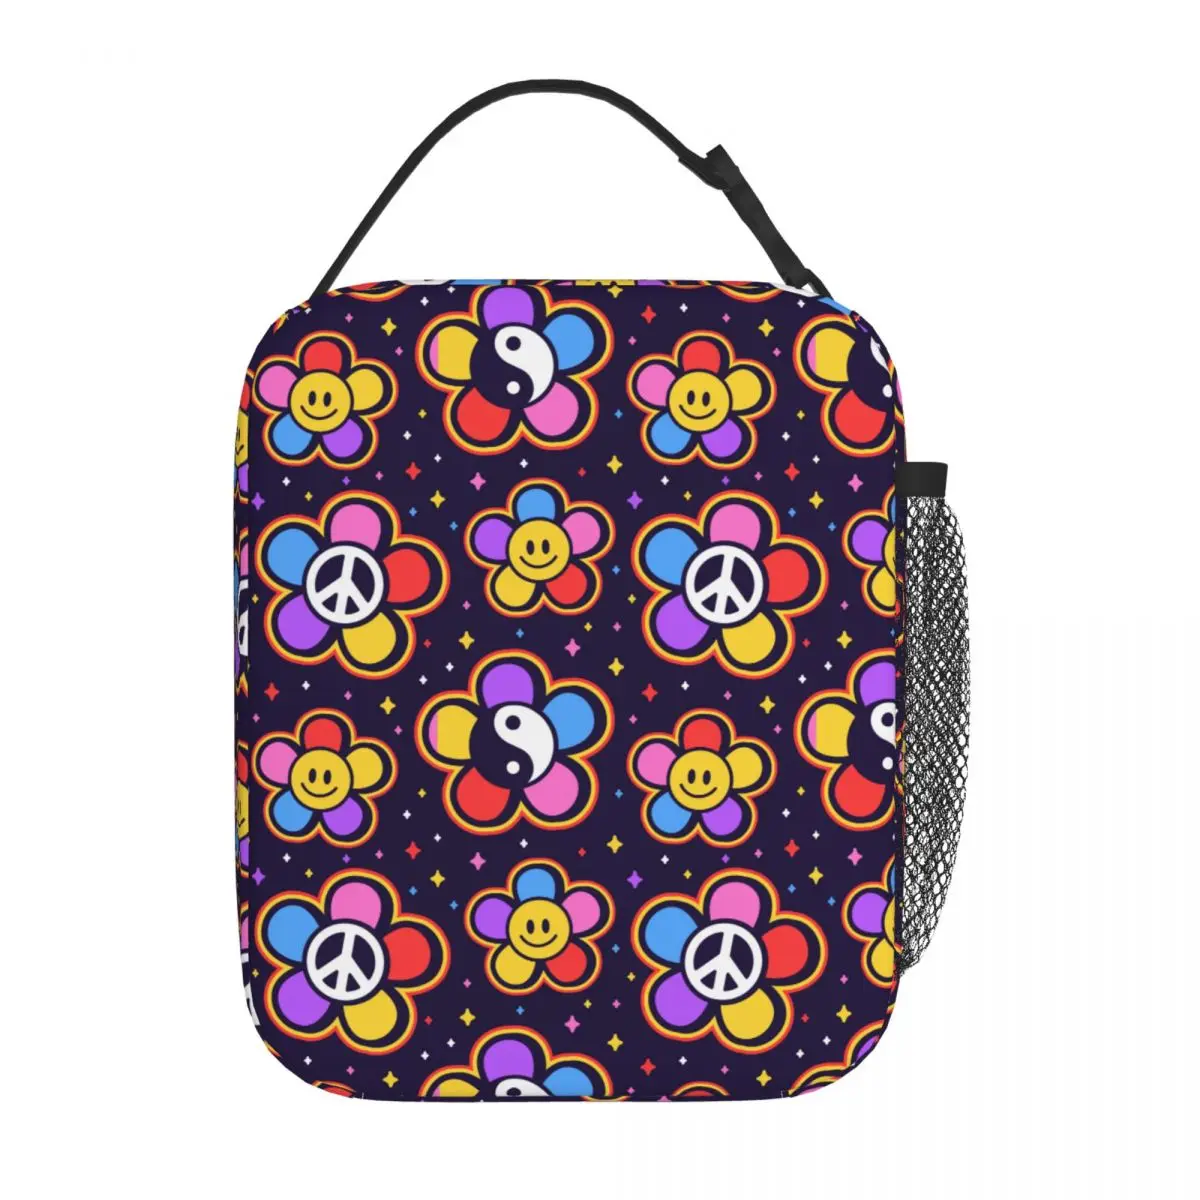 

Yin Yang Smile Face Hippie Insulated Lunch Tote Bag Trippy Food Box Portable Cooler Thermal Bento Box Work